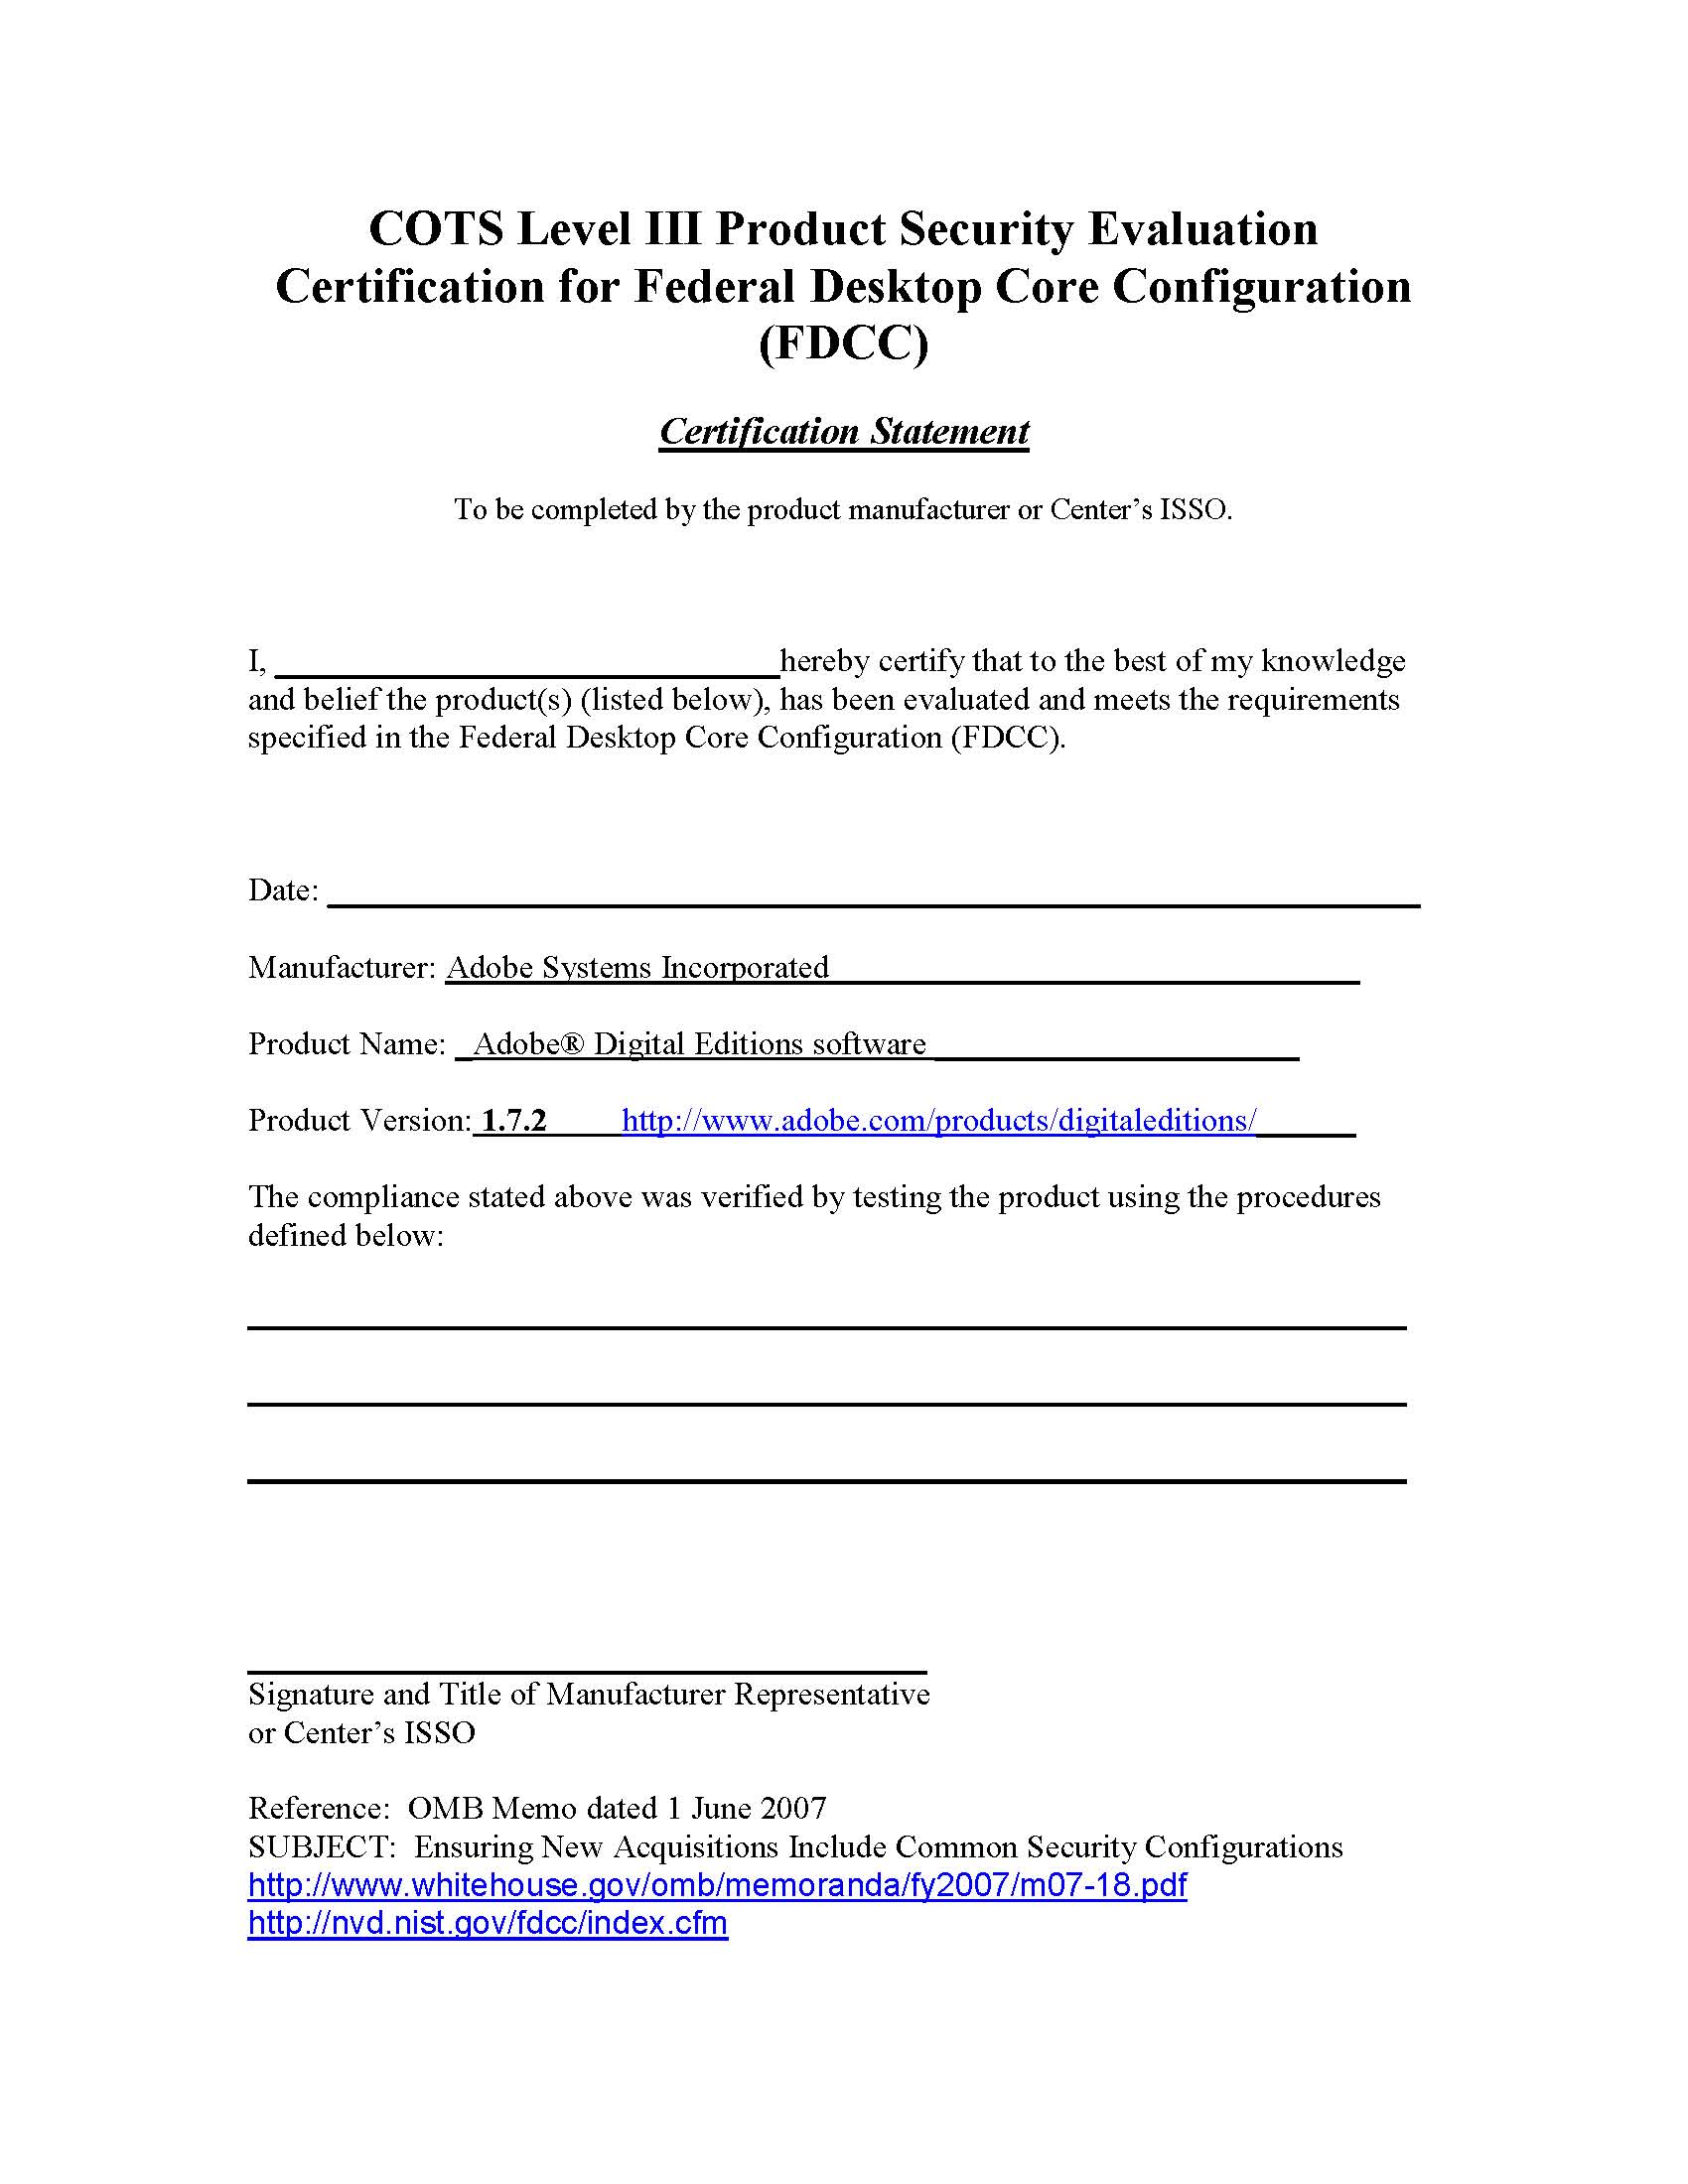 Level_III_Product_Security_Evaluation_FDCC_Certification_Statement.jpg